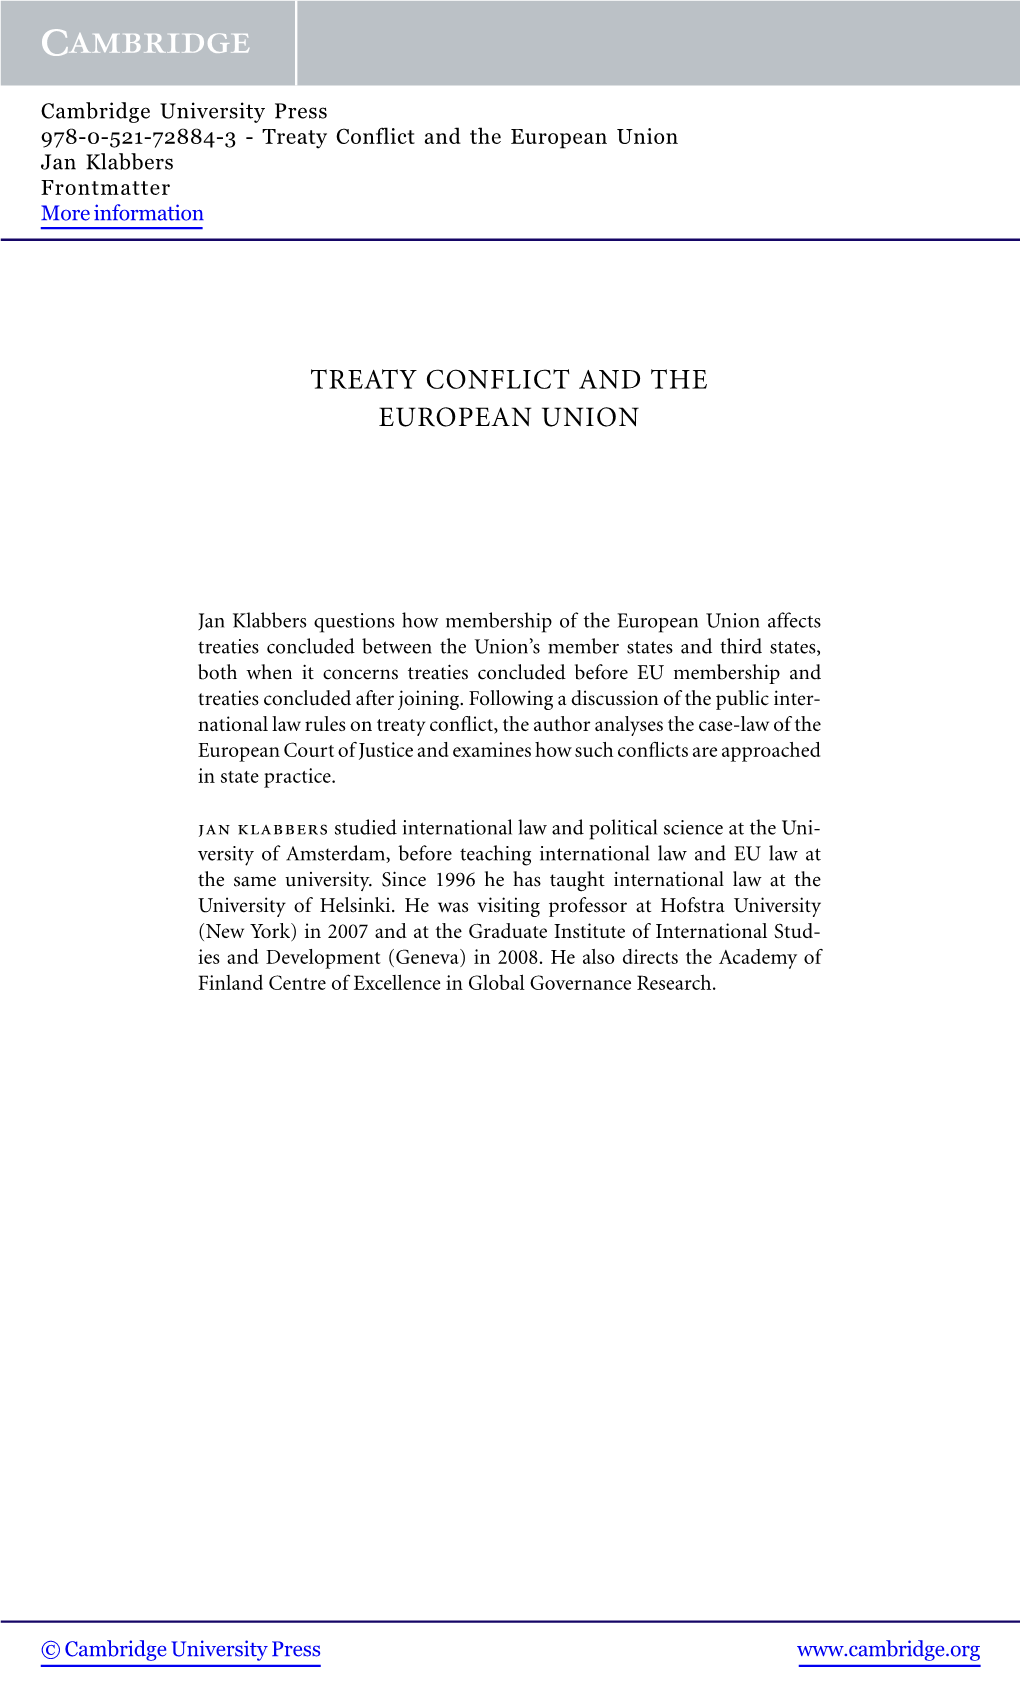 Treaty Conflict and the European Union Jan Klabbers Frontmatter More Information